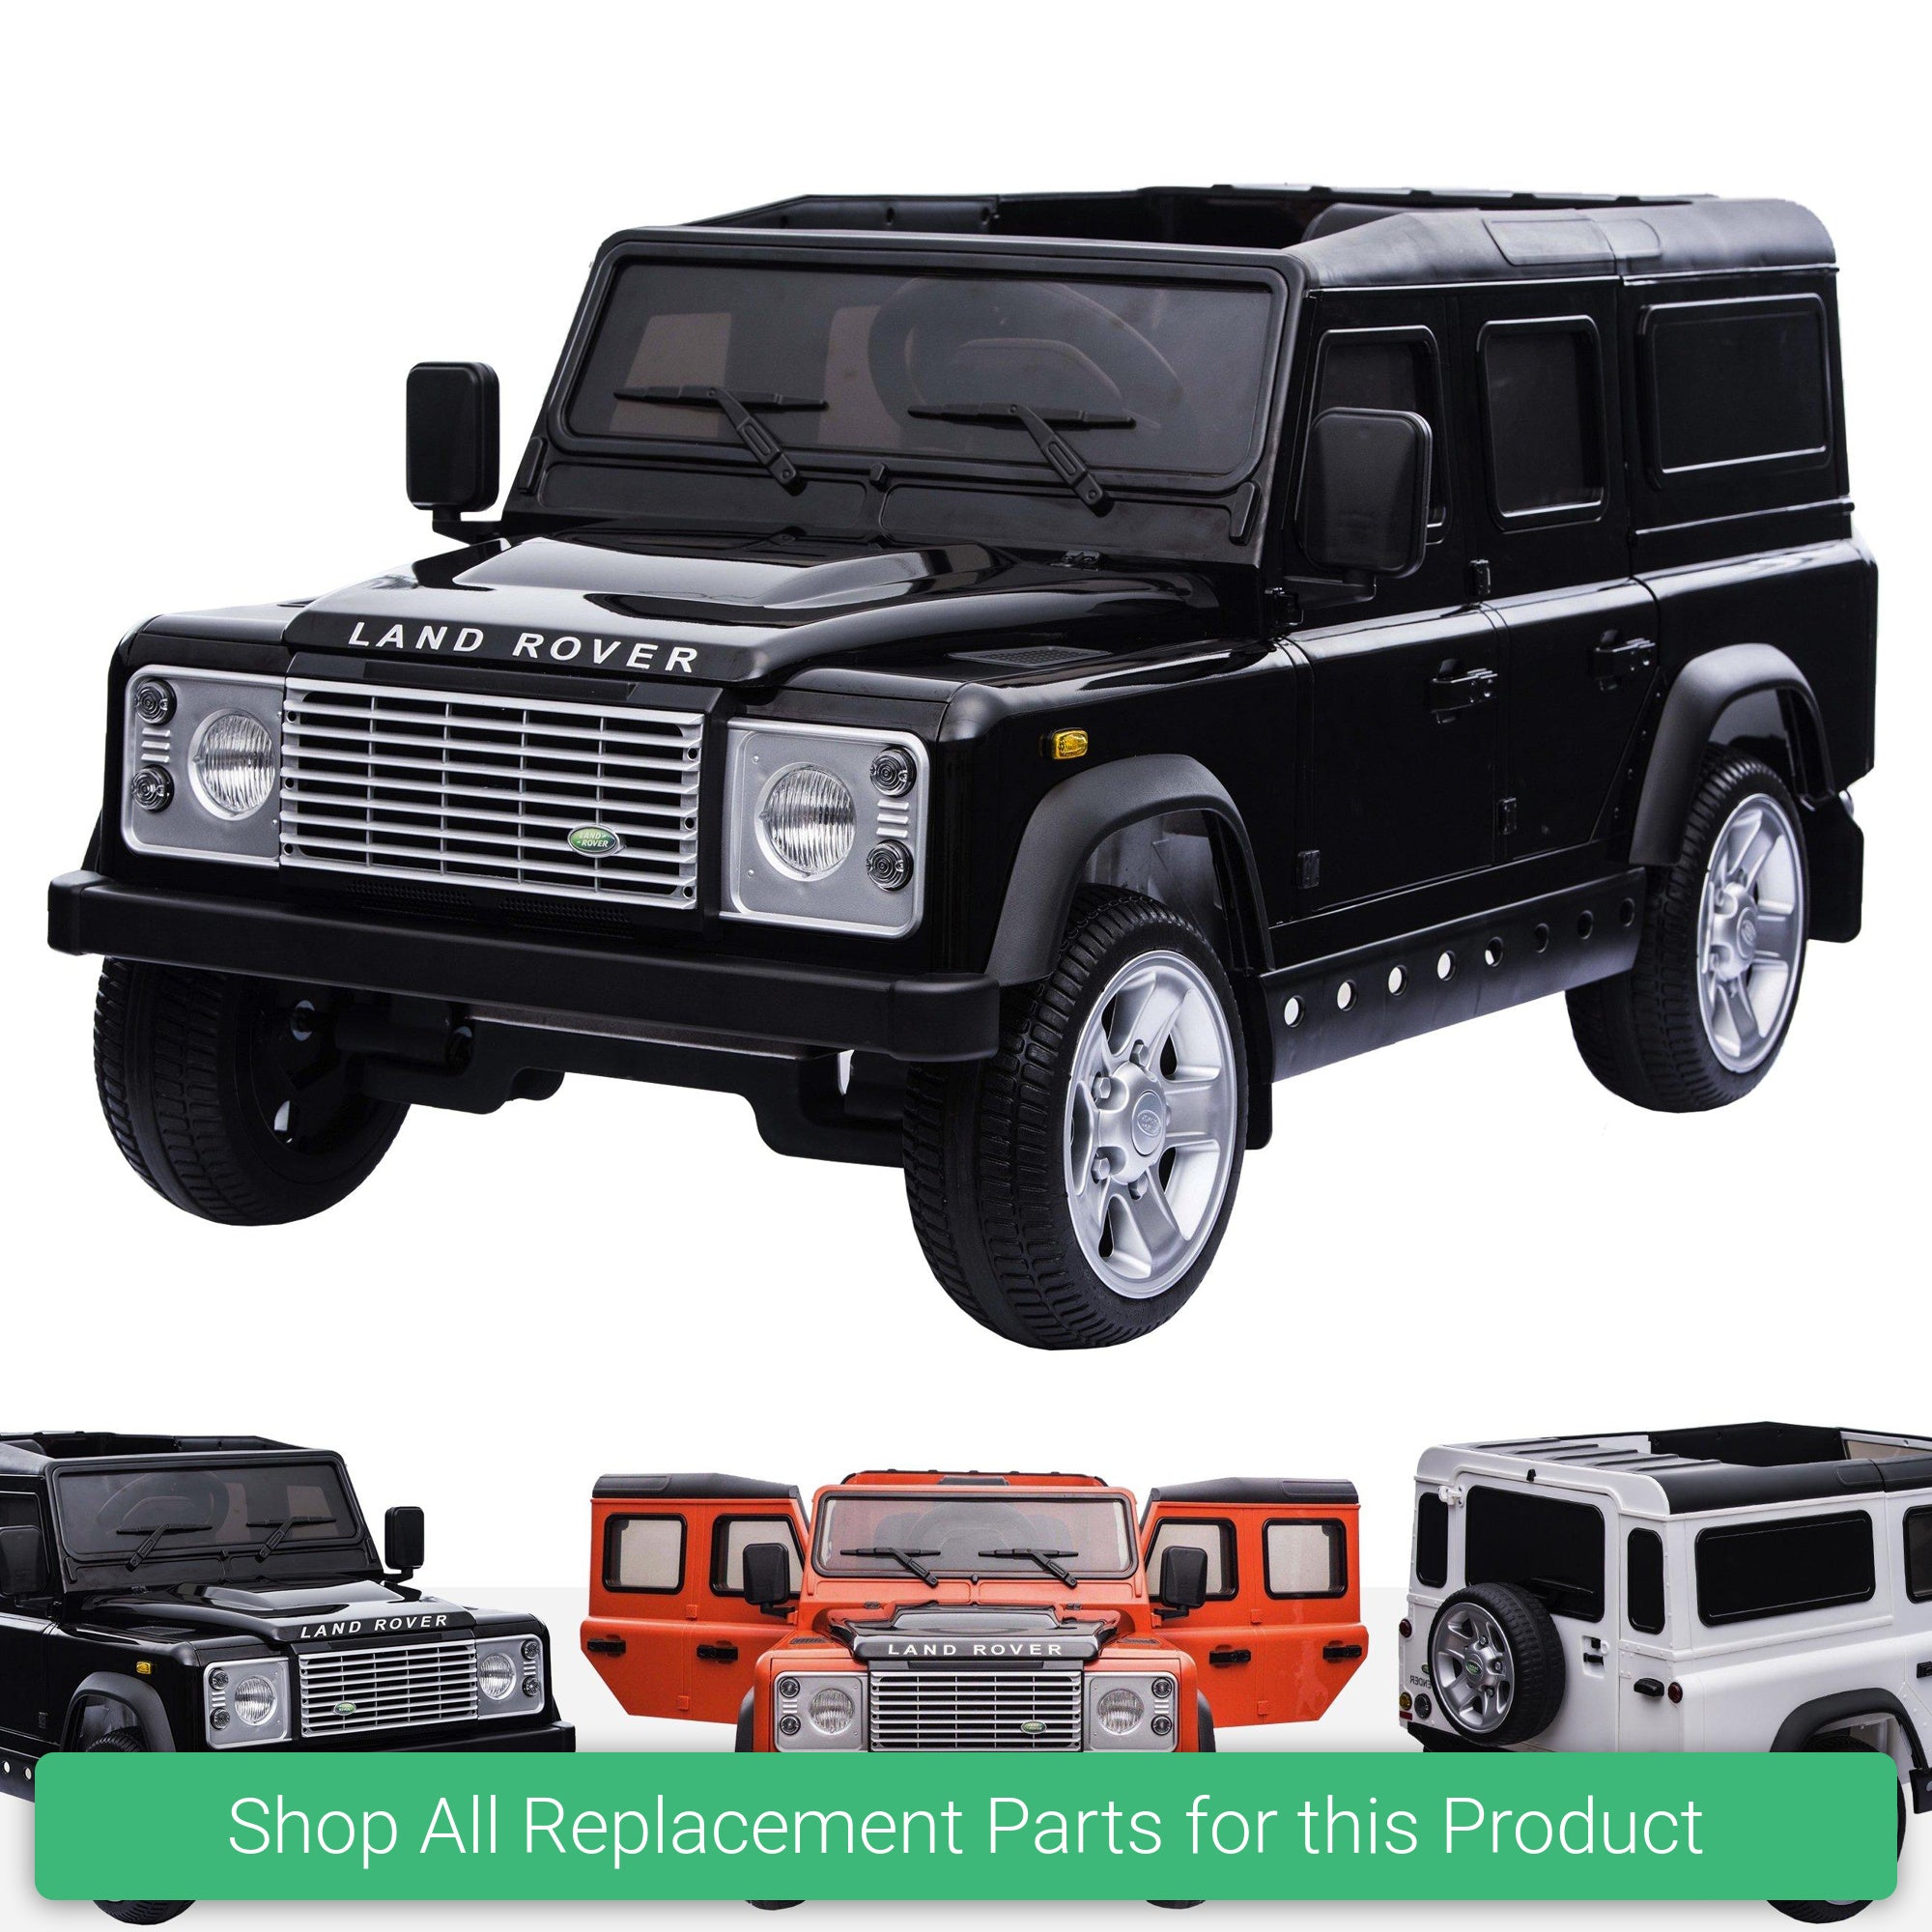 Replacement Parts and Spares for Kids Land Rover Defender - LAN-DEF-2019 - DMD-198